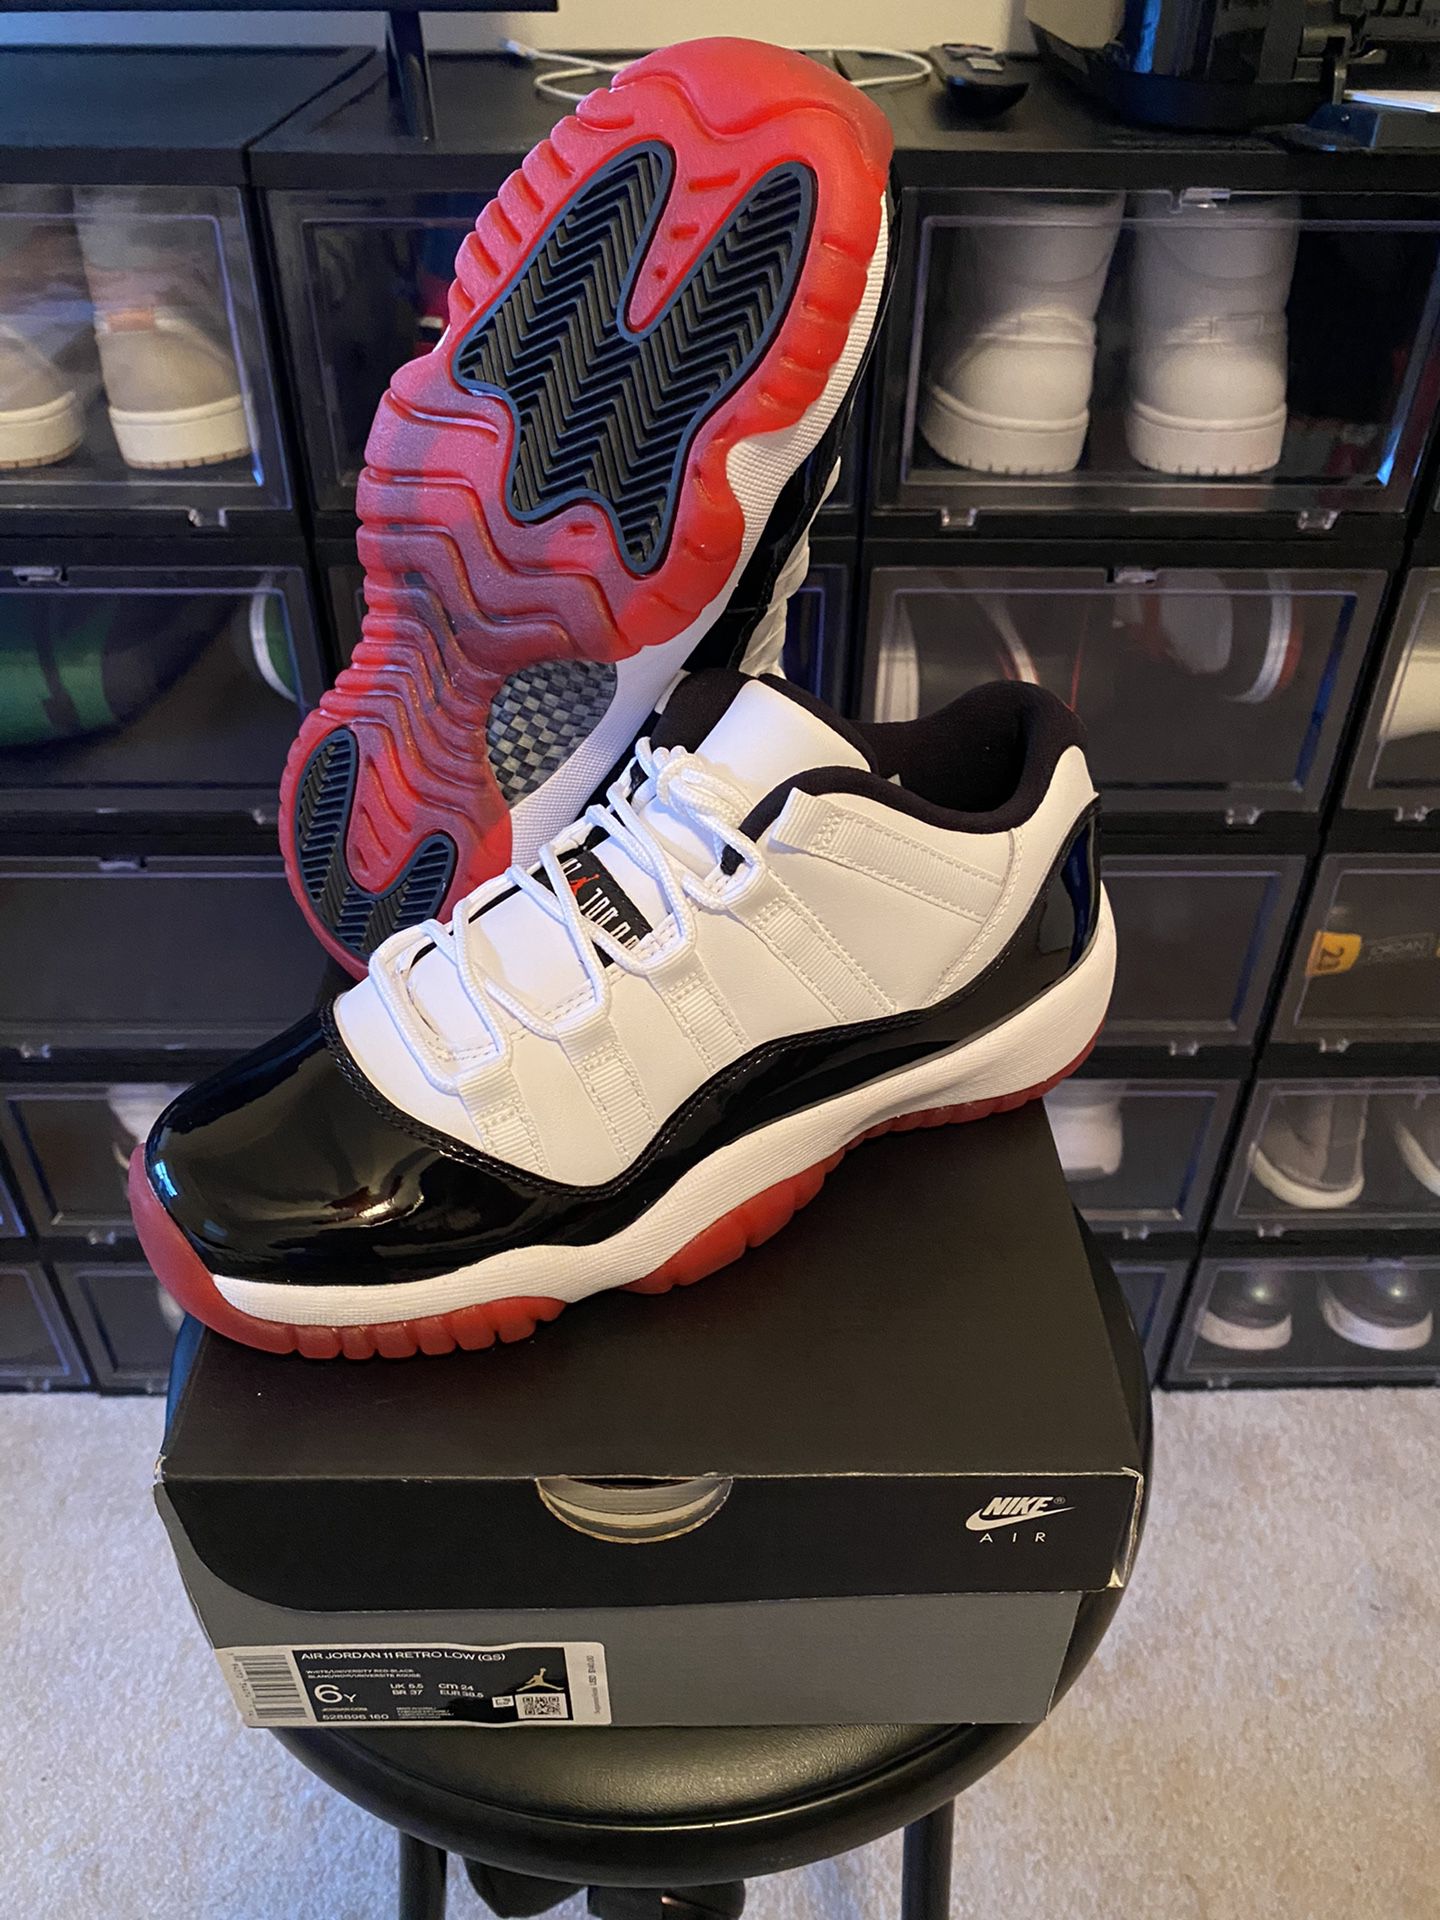 Nike Air Jordan Retro 11 Low Concord Bred 2020 GS Sizes 5 & 6 Brand New DS